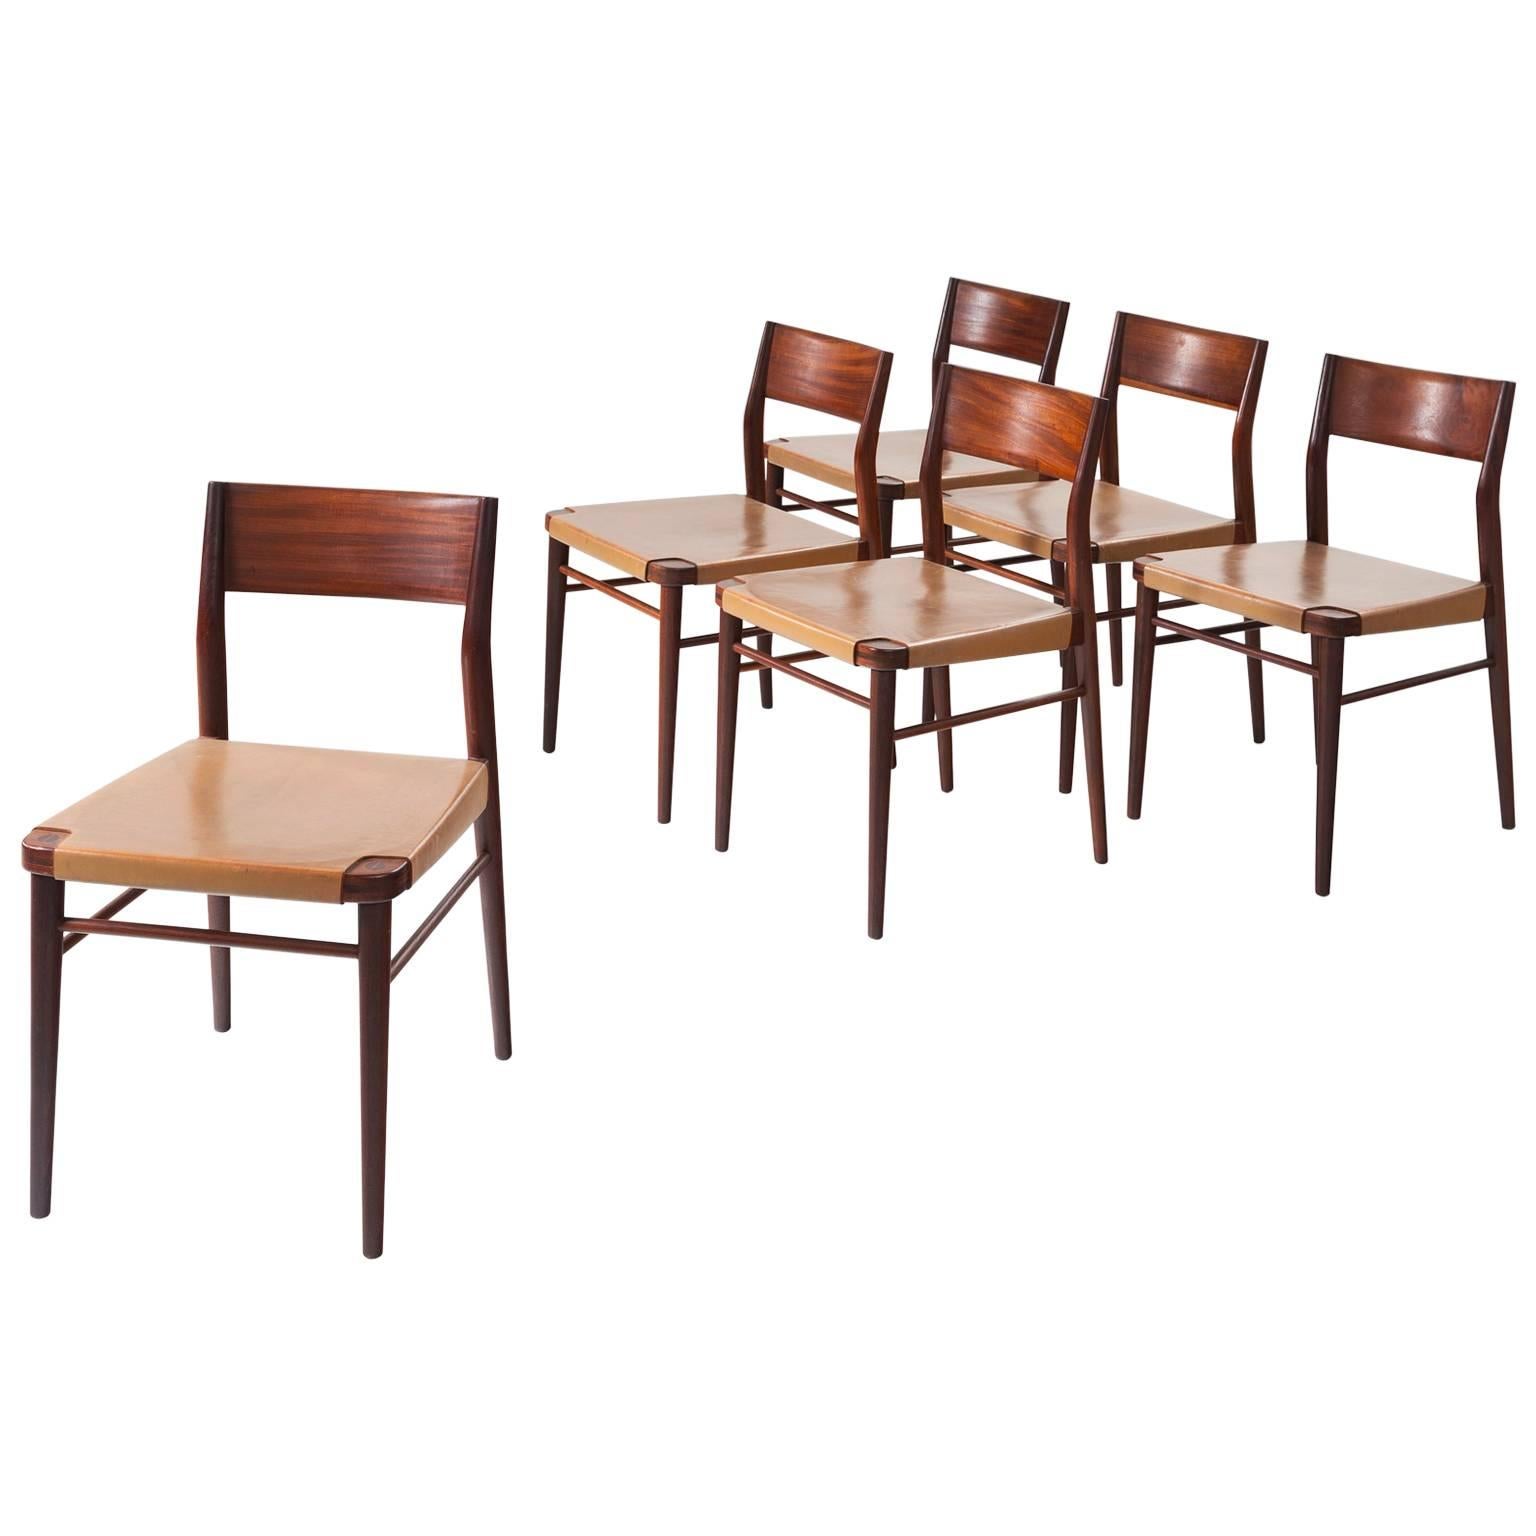 Set of Six Italian Dining Chairs in Mahogany and Natural Leather